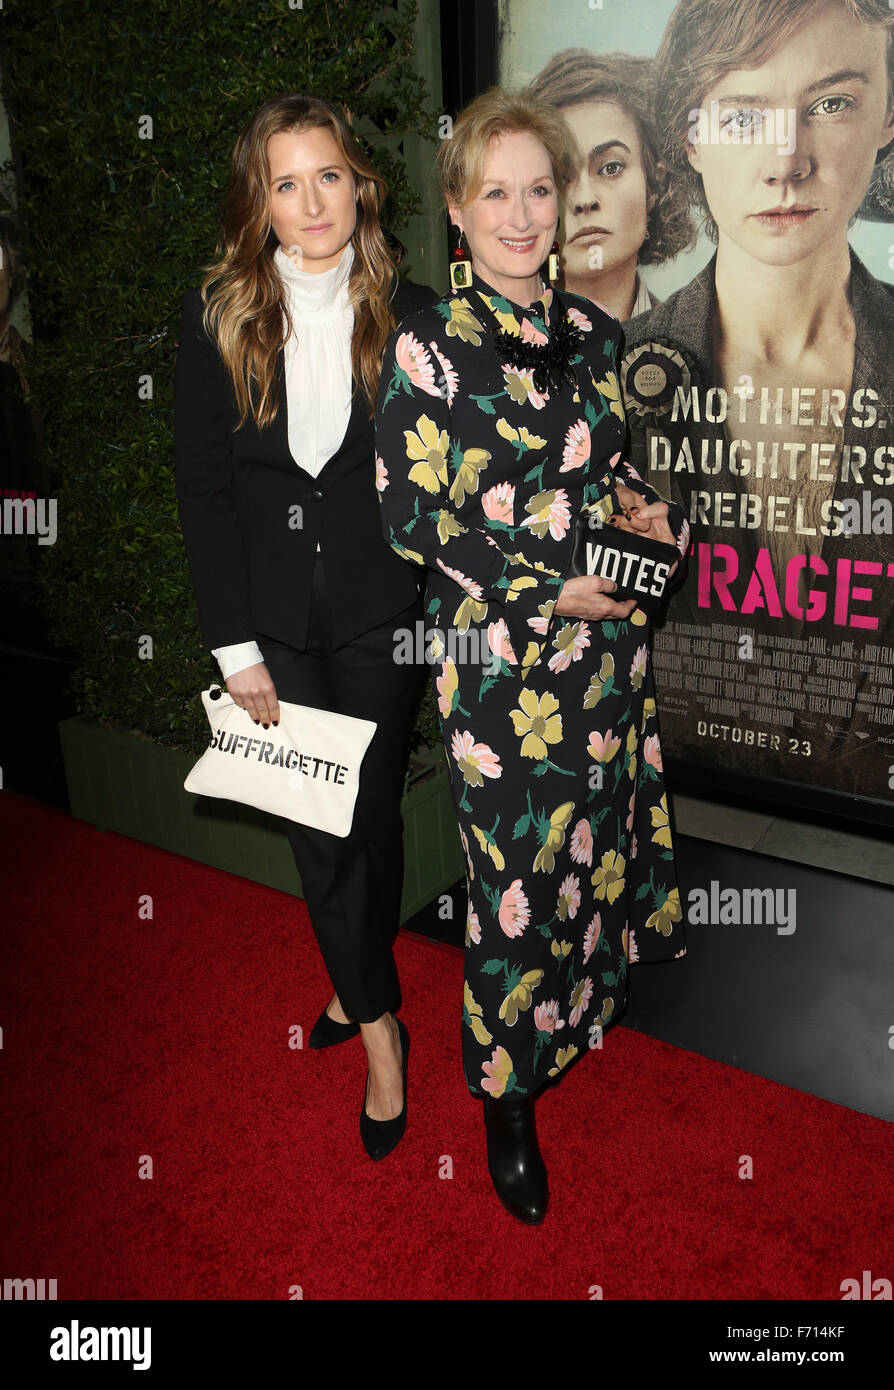 Premiere Of Focus Features' 'Suffragette'  Featuring: Grace Gummer, Meryl Streep Where: Beverly Hills, California, United States When: 20 Oct 2015 Stock Photo